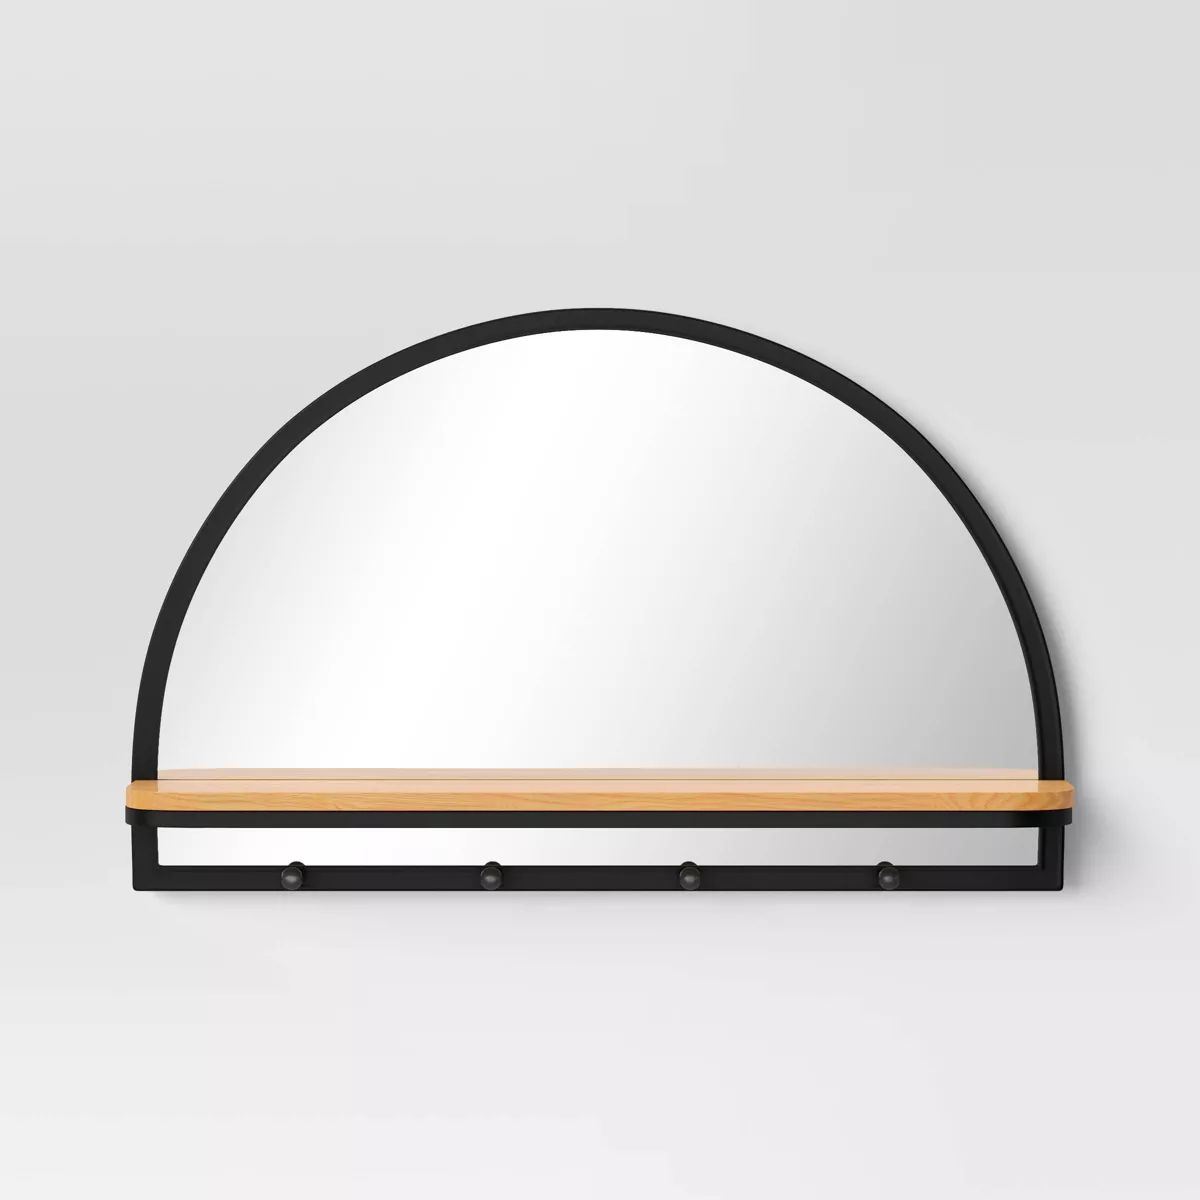 24"x15" Arch Wall Mirror with Shelf and Pegs Brown/Black - Threshold™ | Target